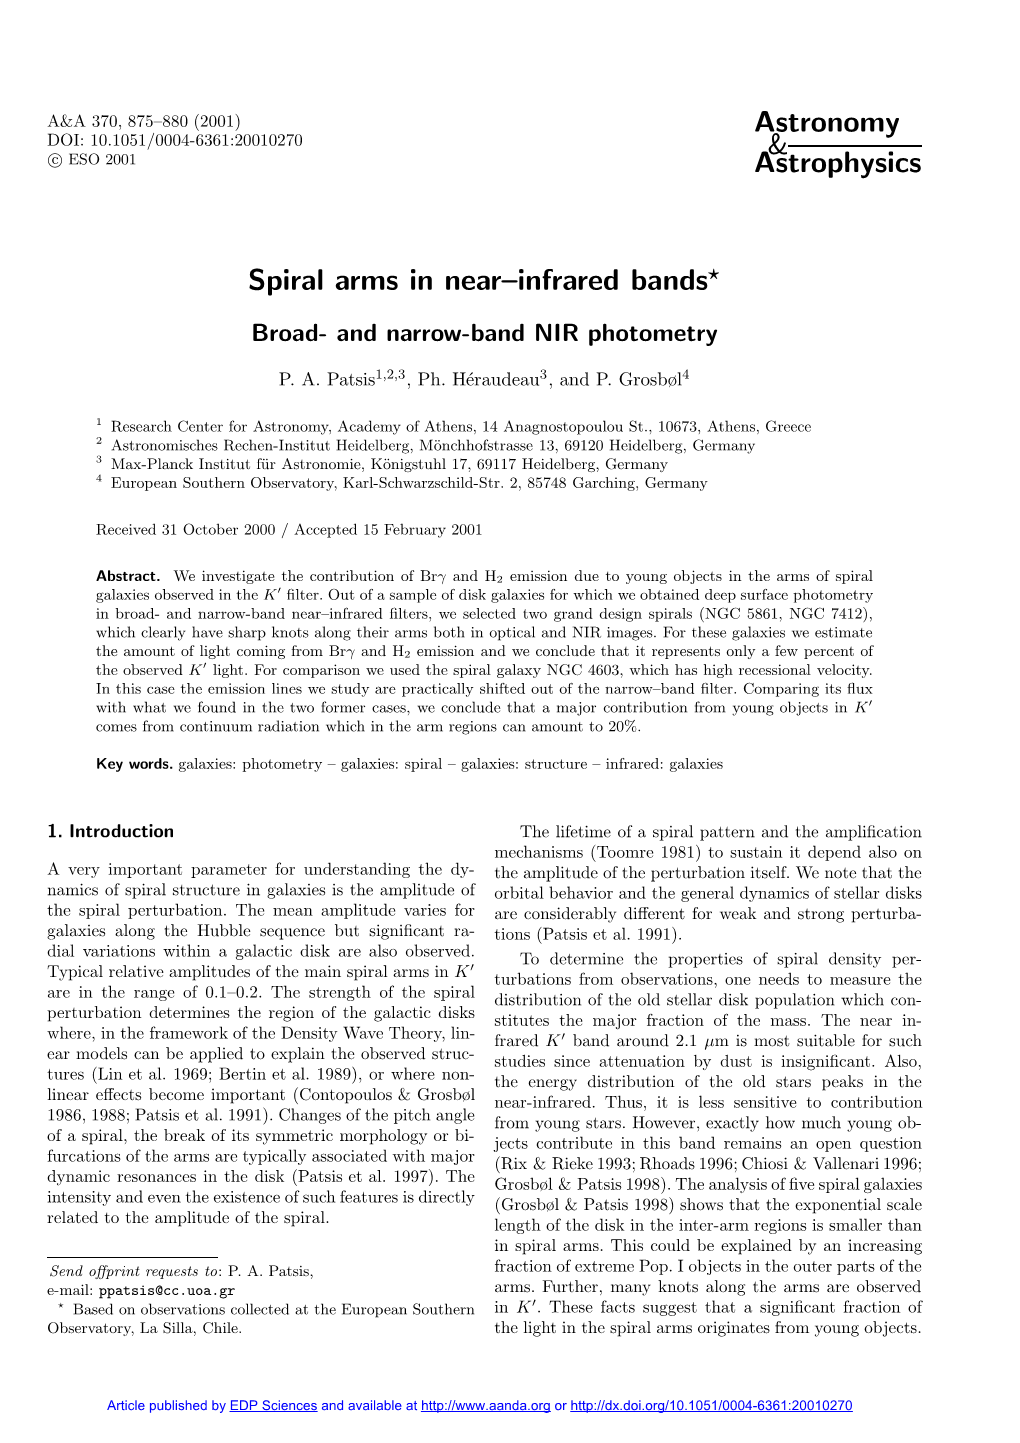 Spiral Arms in Near-Infrared Bands